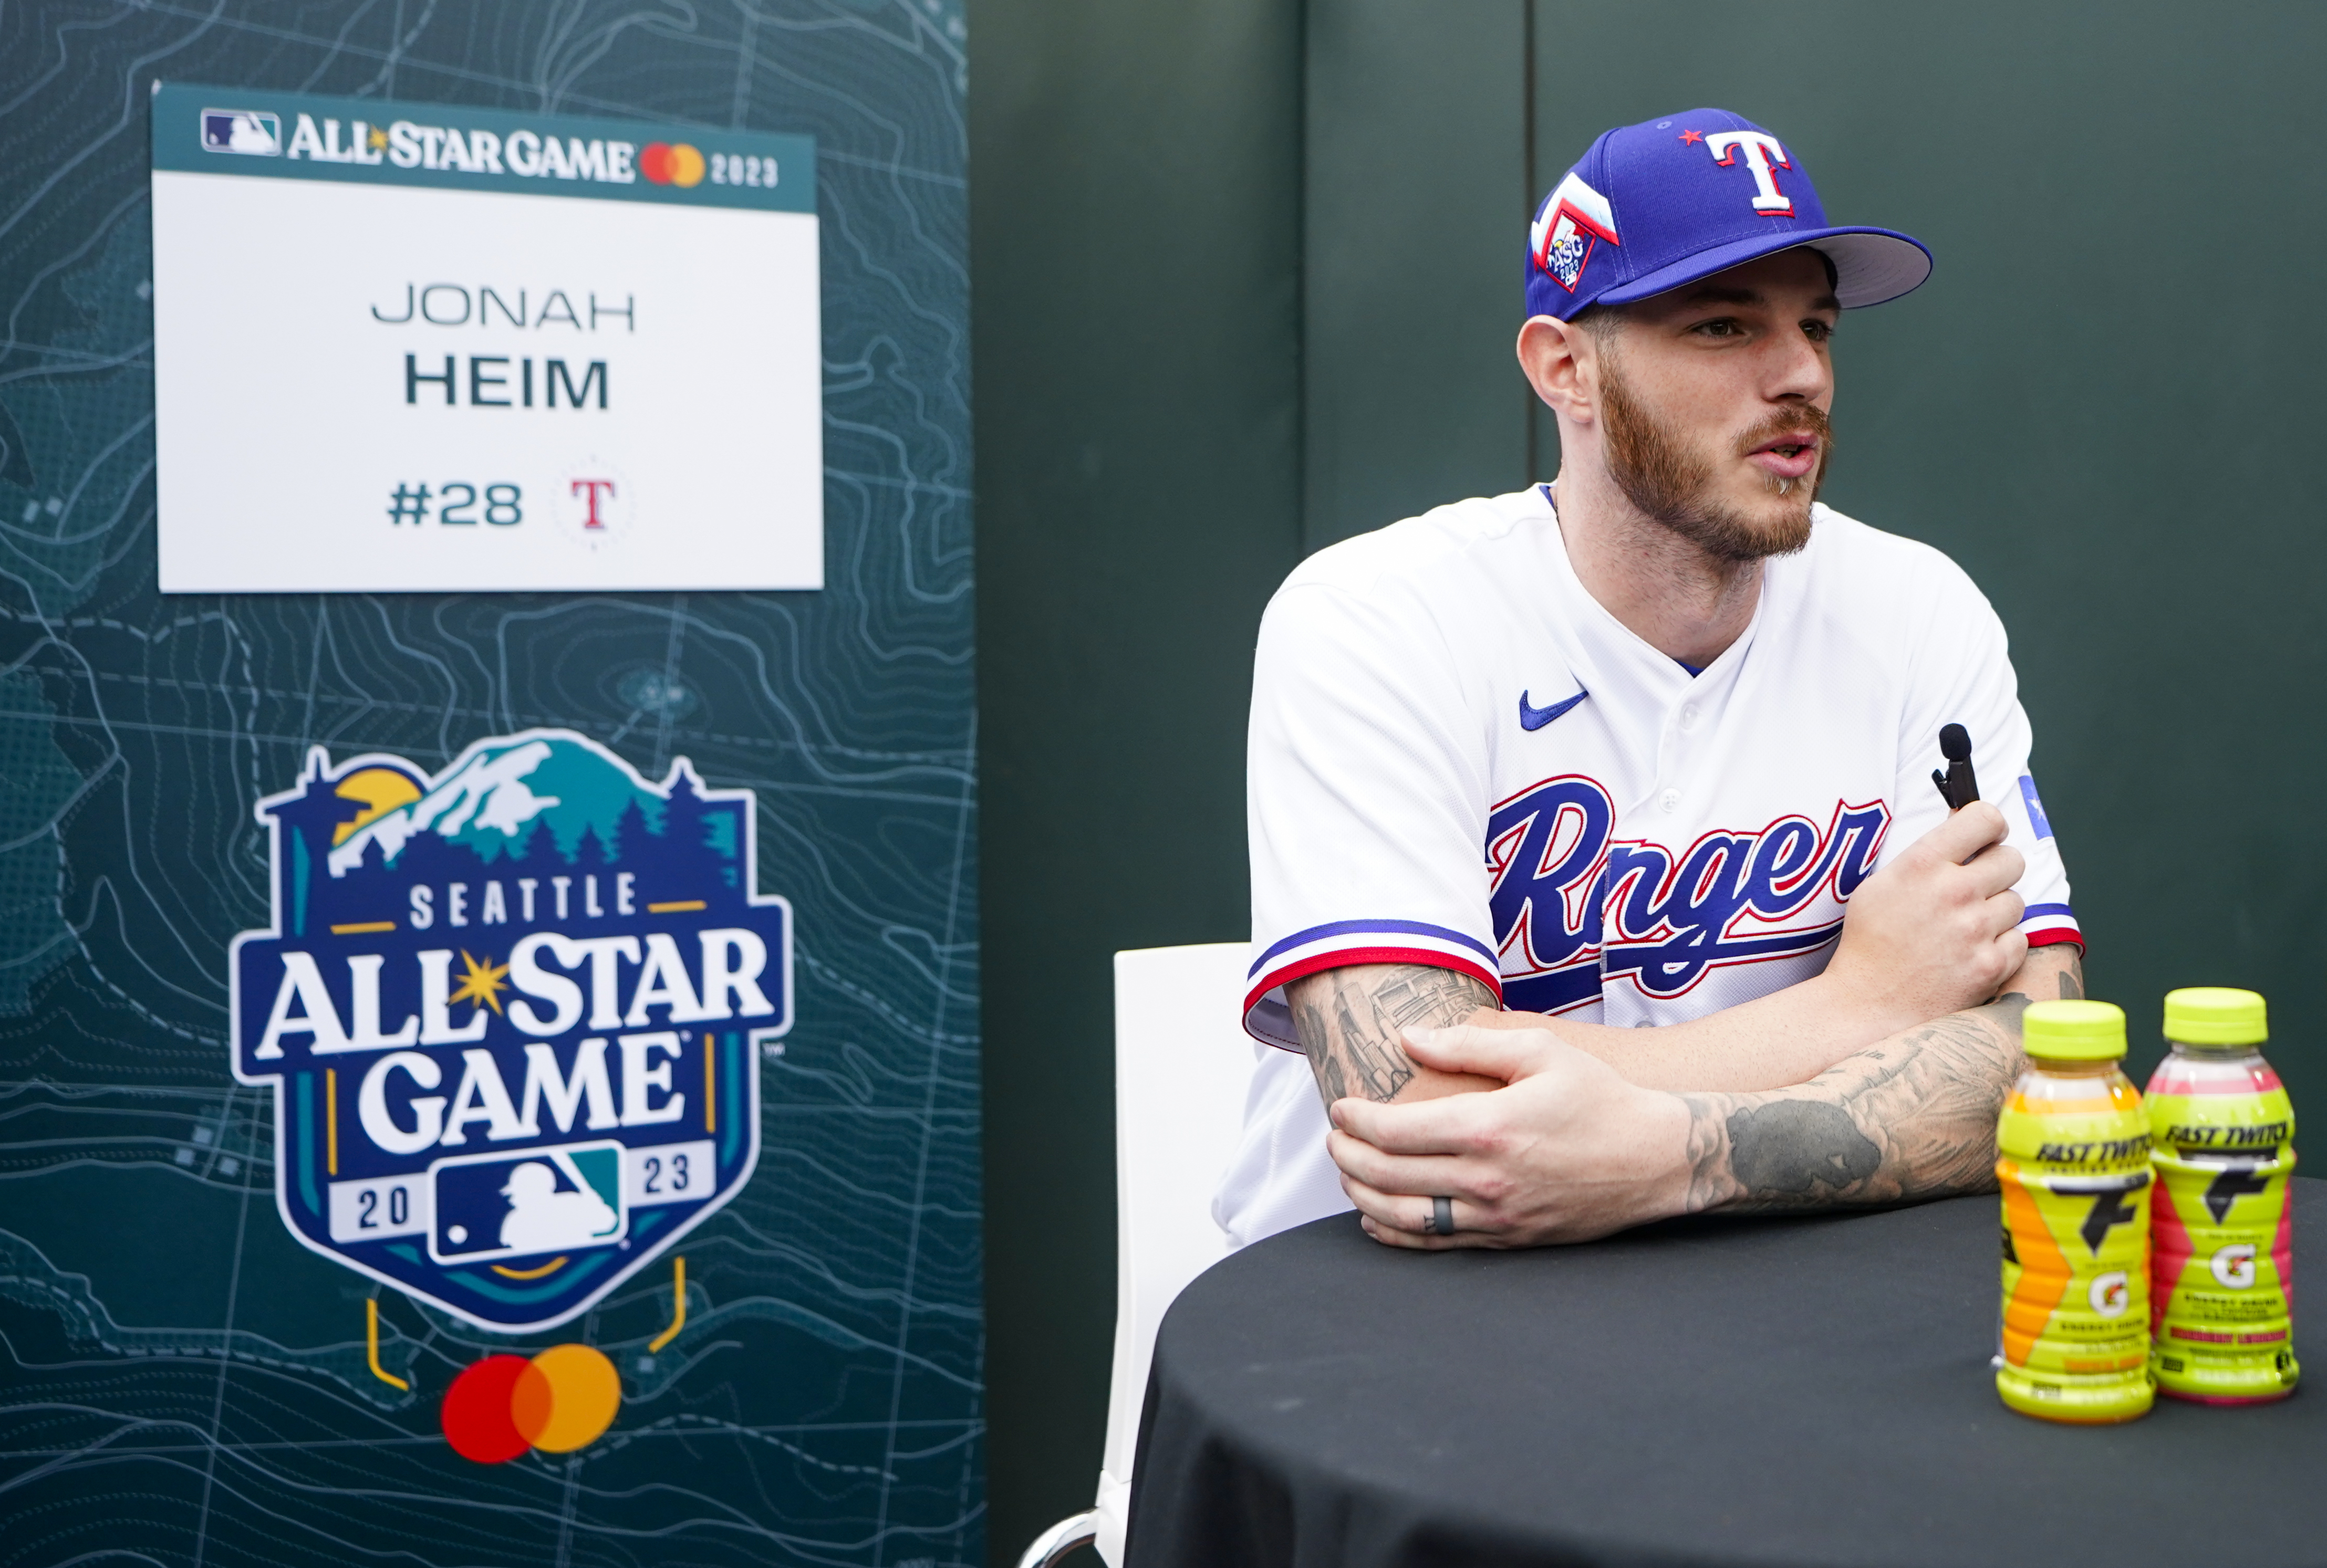 Rangers' Jonah Heim joins exclusive club with heads-up play in MLB